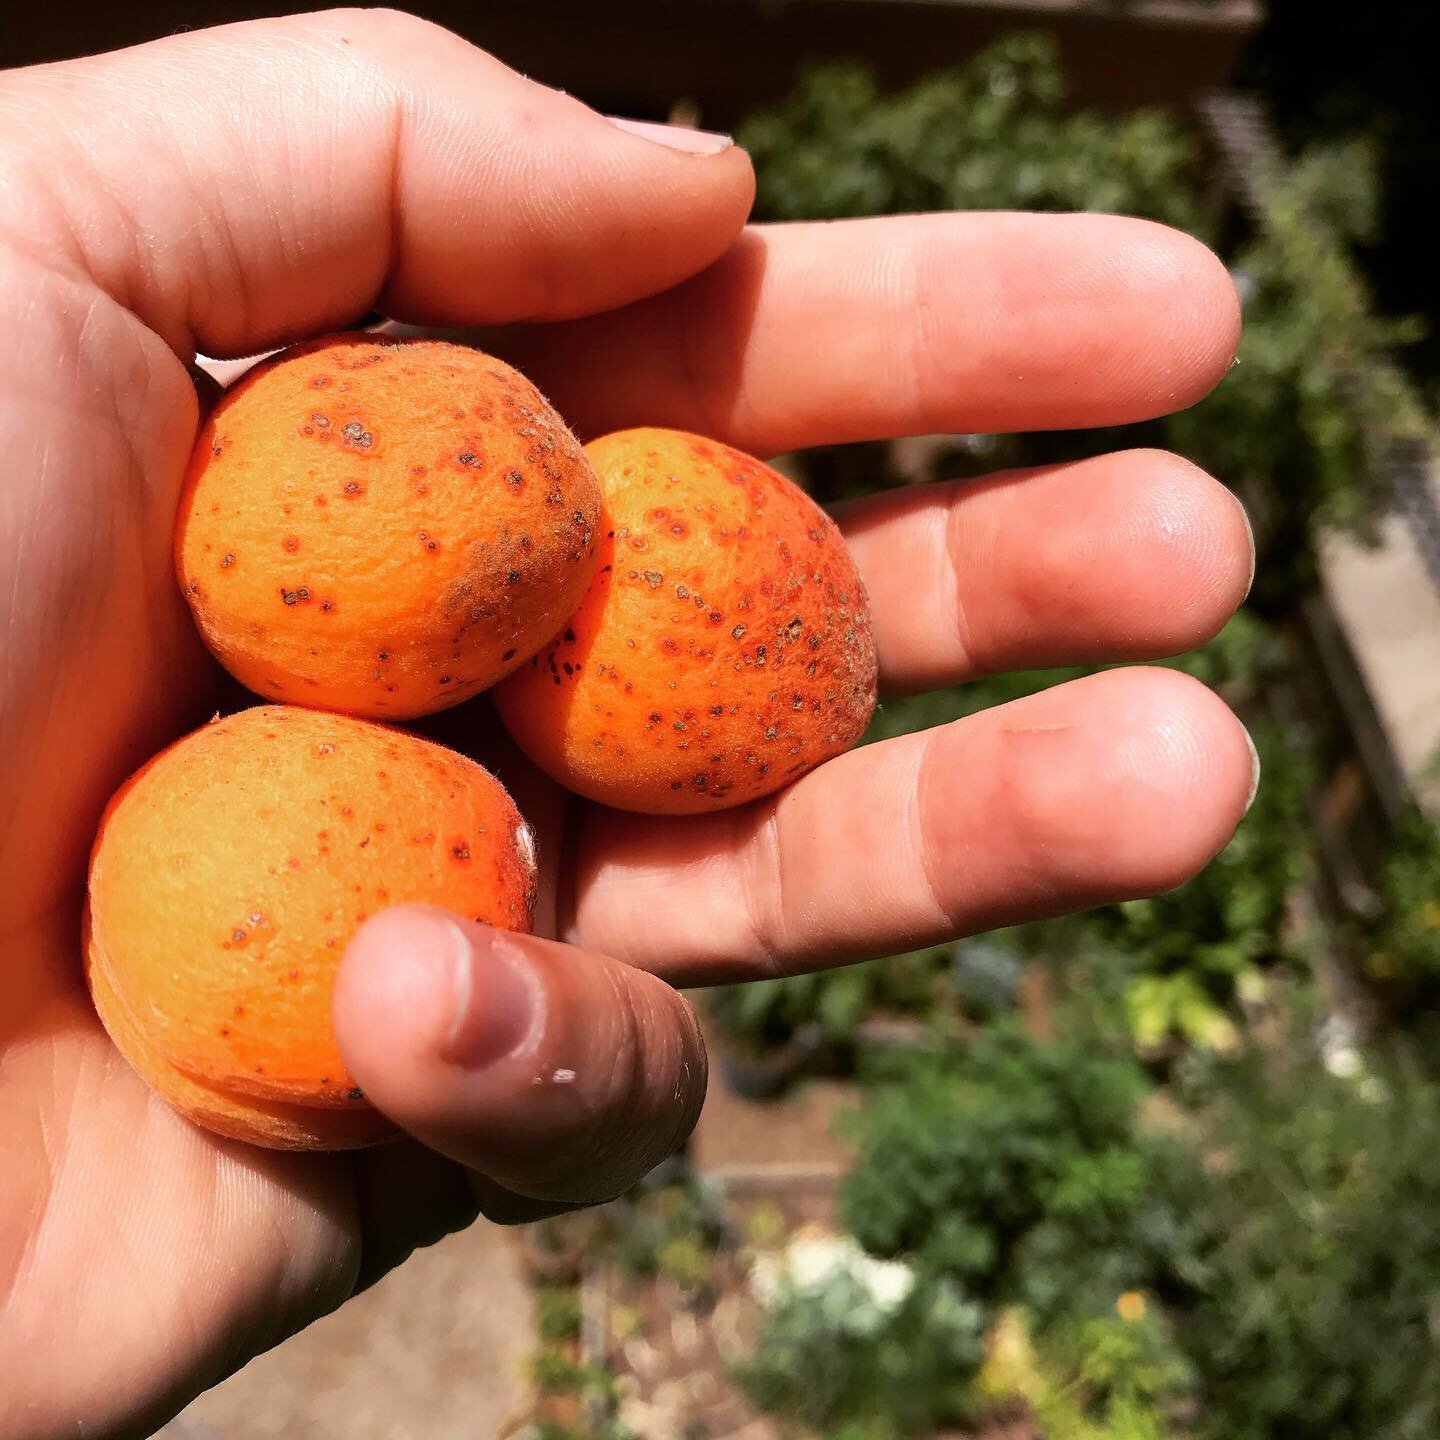 🍑🍑🍑Tis the season for #tsiran! Apricot trees are a top contender for the ancient tree of life in SWANA lands and lore. Archeological evidence shows that apricots were continuously cultivated around Yerevan for at least 6k years! And, yes, my Armen